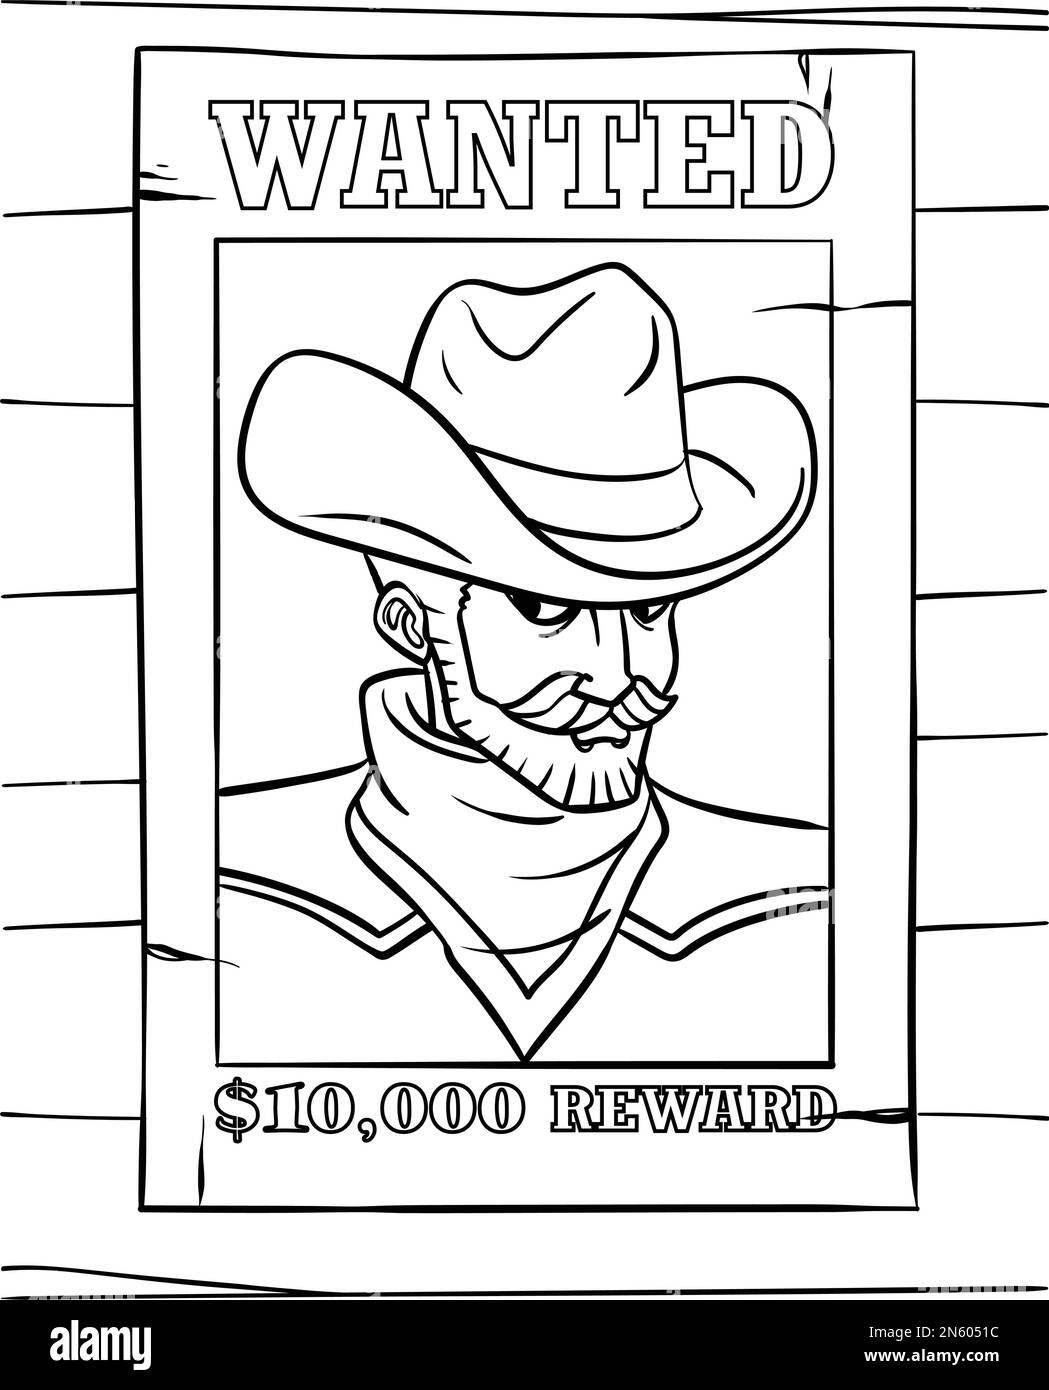 Cowboy Wanted Poster Coloring Page for Kids Illustrazione Vettoriale